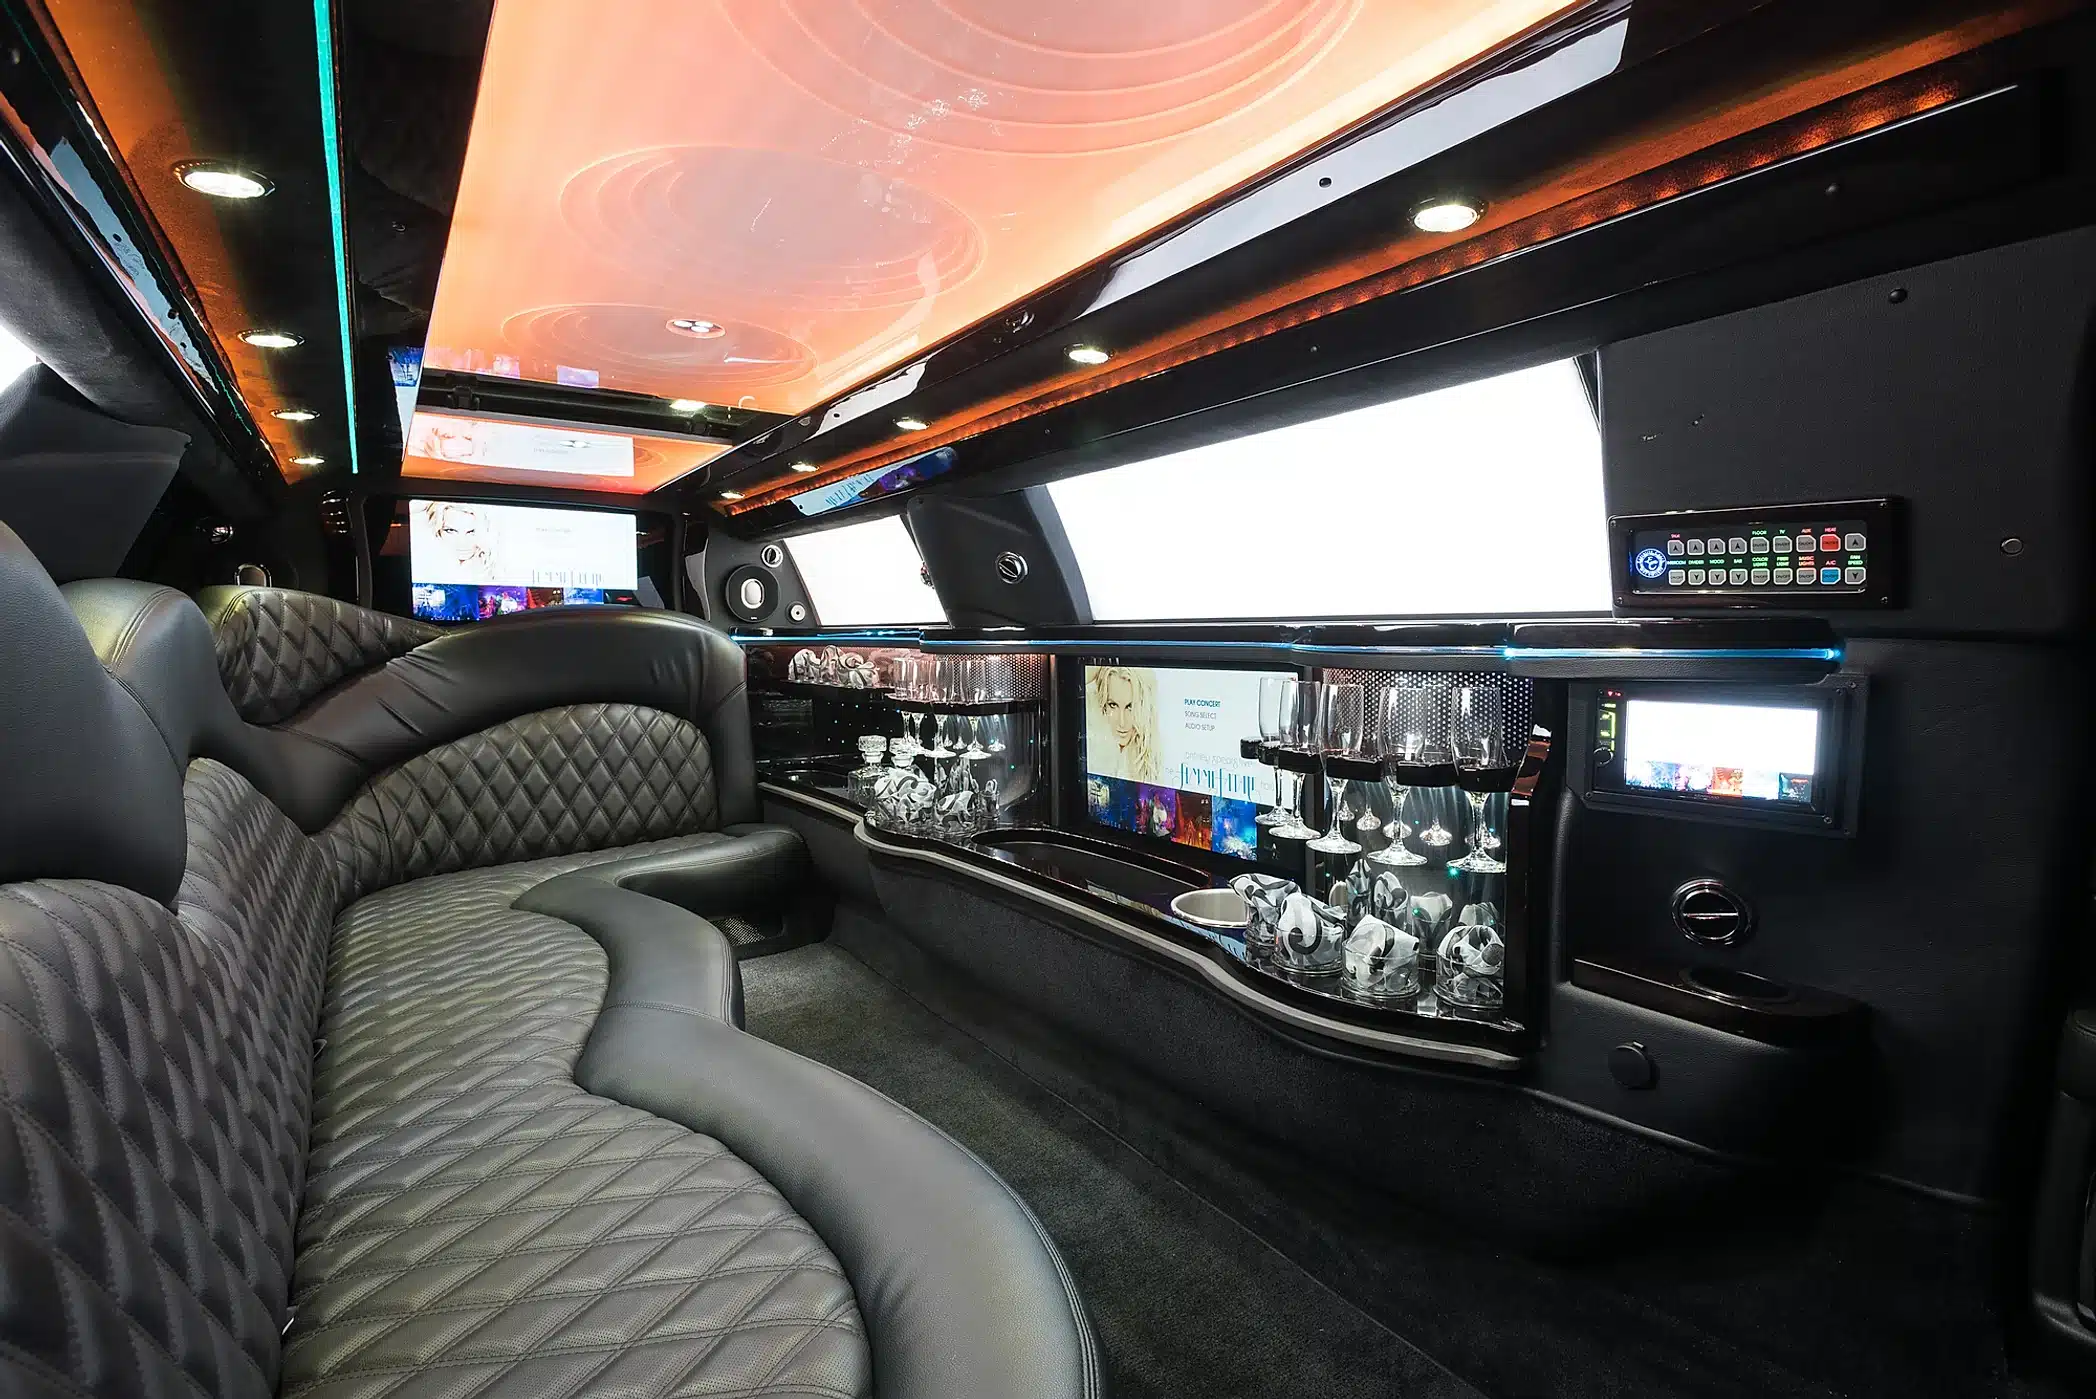 Why Choose Our Newport Beach Limo Service?